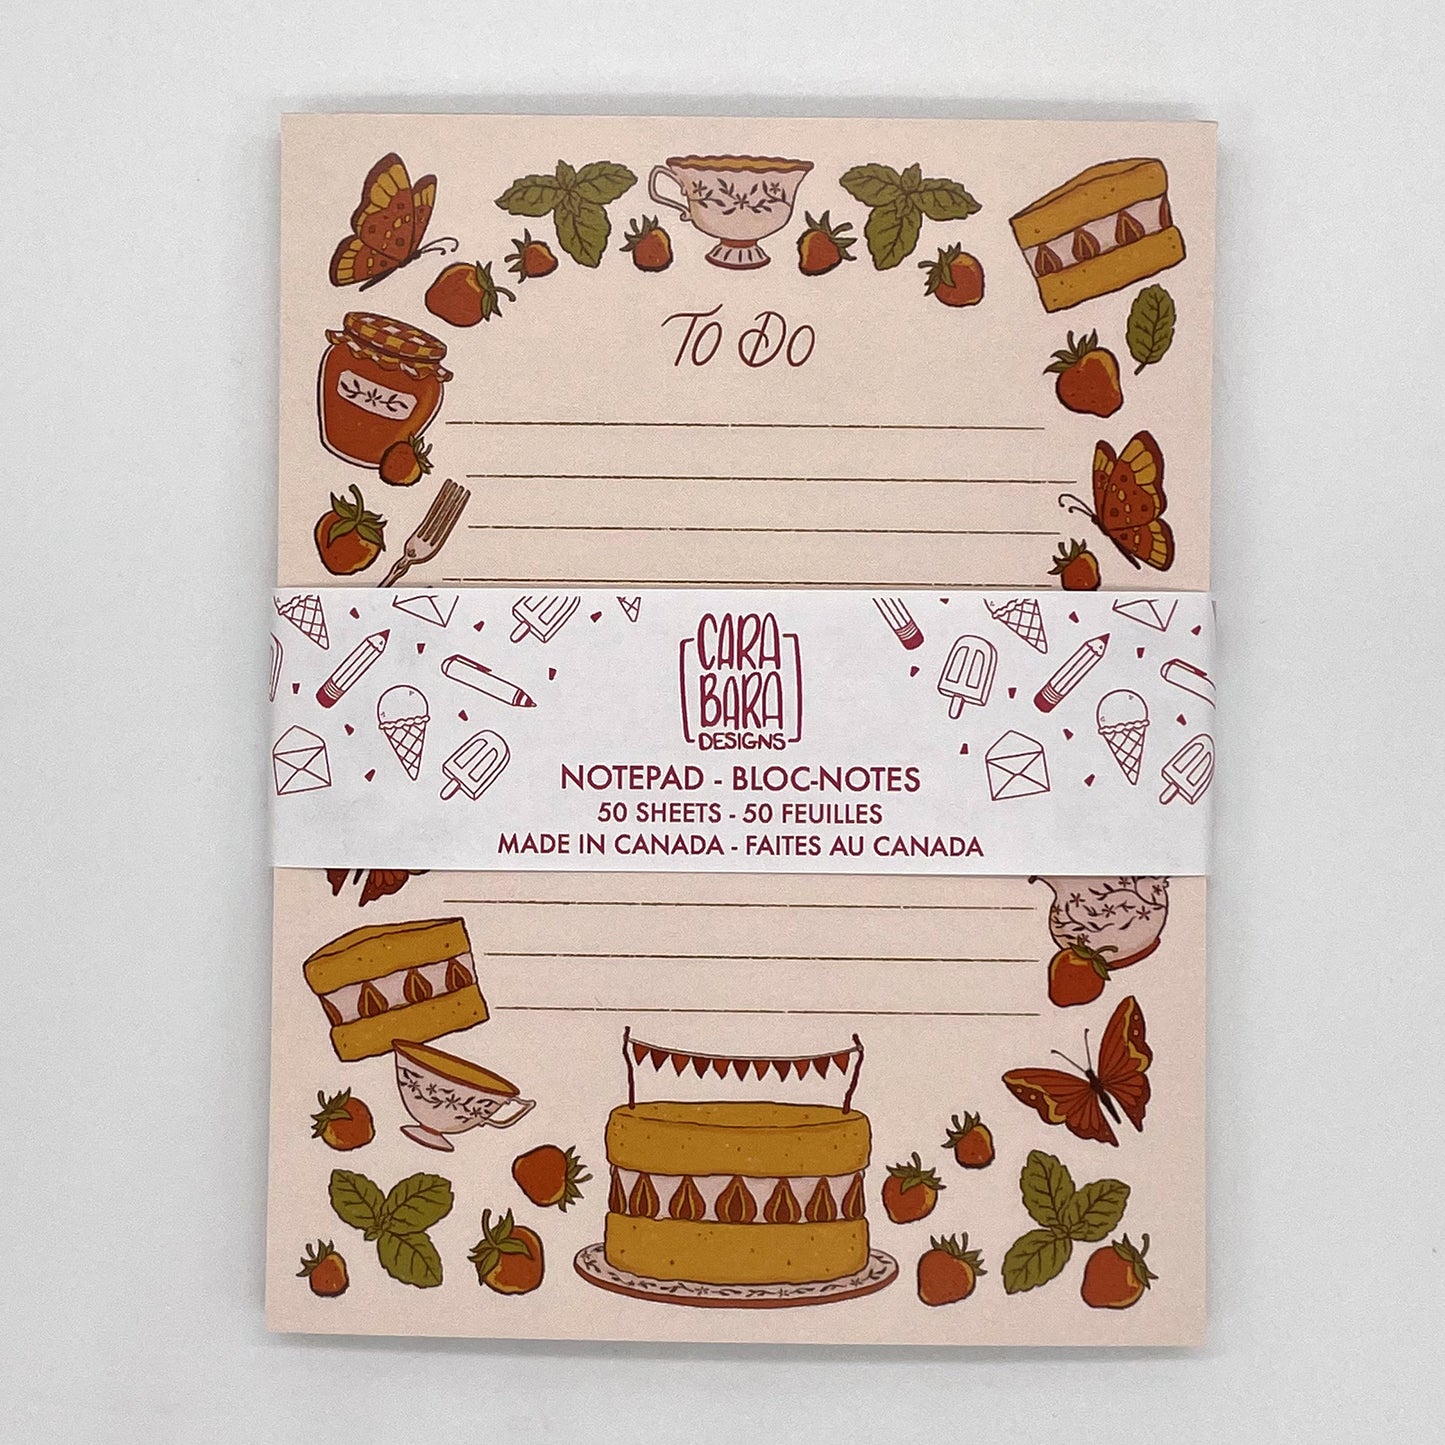 A pink to-do lined cottagecore notepad features illustrated strawberries, mint, cake, tea, and butterflies. It is packaged with a belly band featuring the Carabara Designs logo and indicating that it is 50 pages and made in Canada.